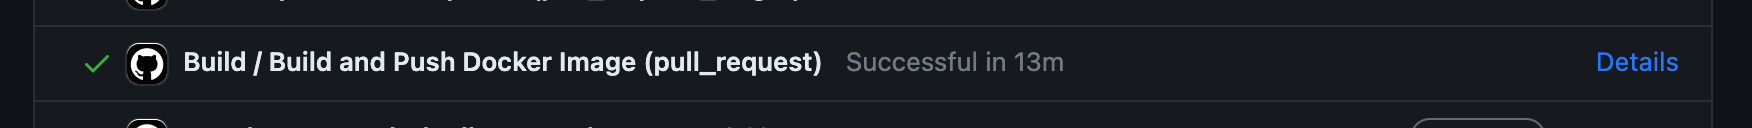 GitHub Actions UI: Waiting for build to complete successfully